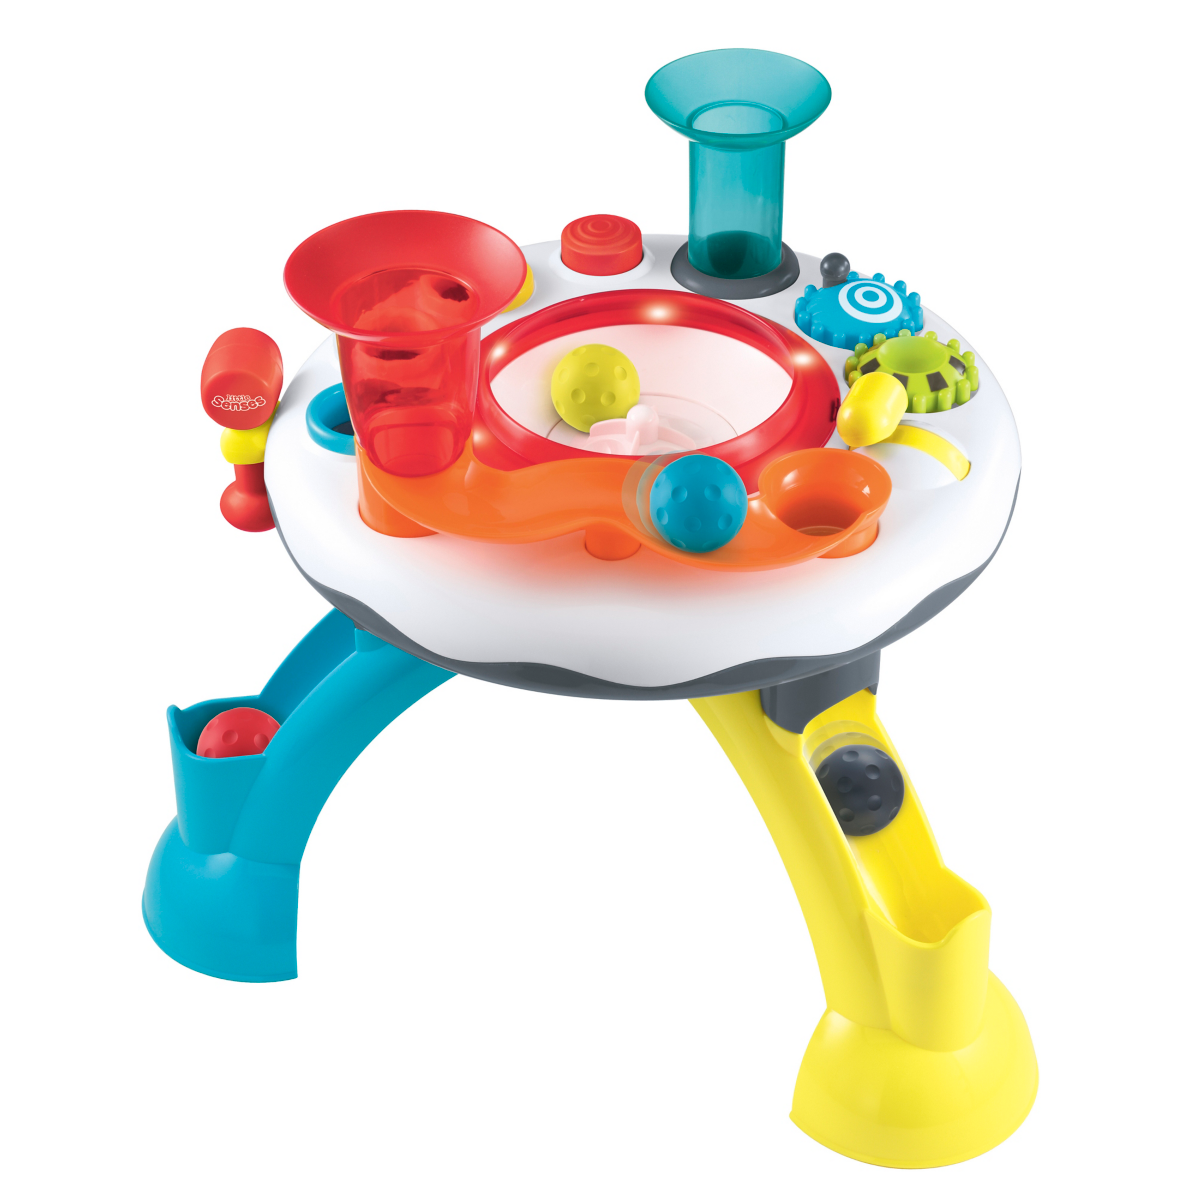 Little Senses Lights and Sounds Activity Table | Early Learning Centre